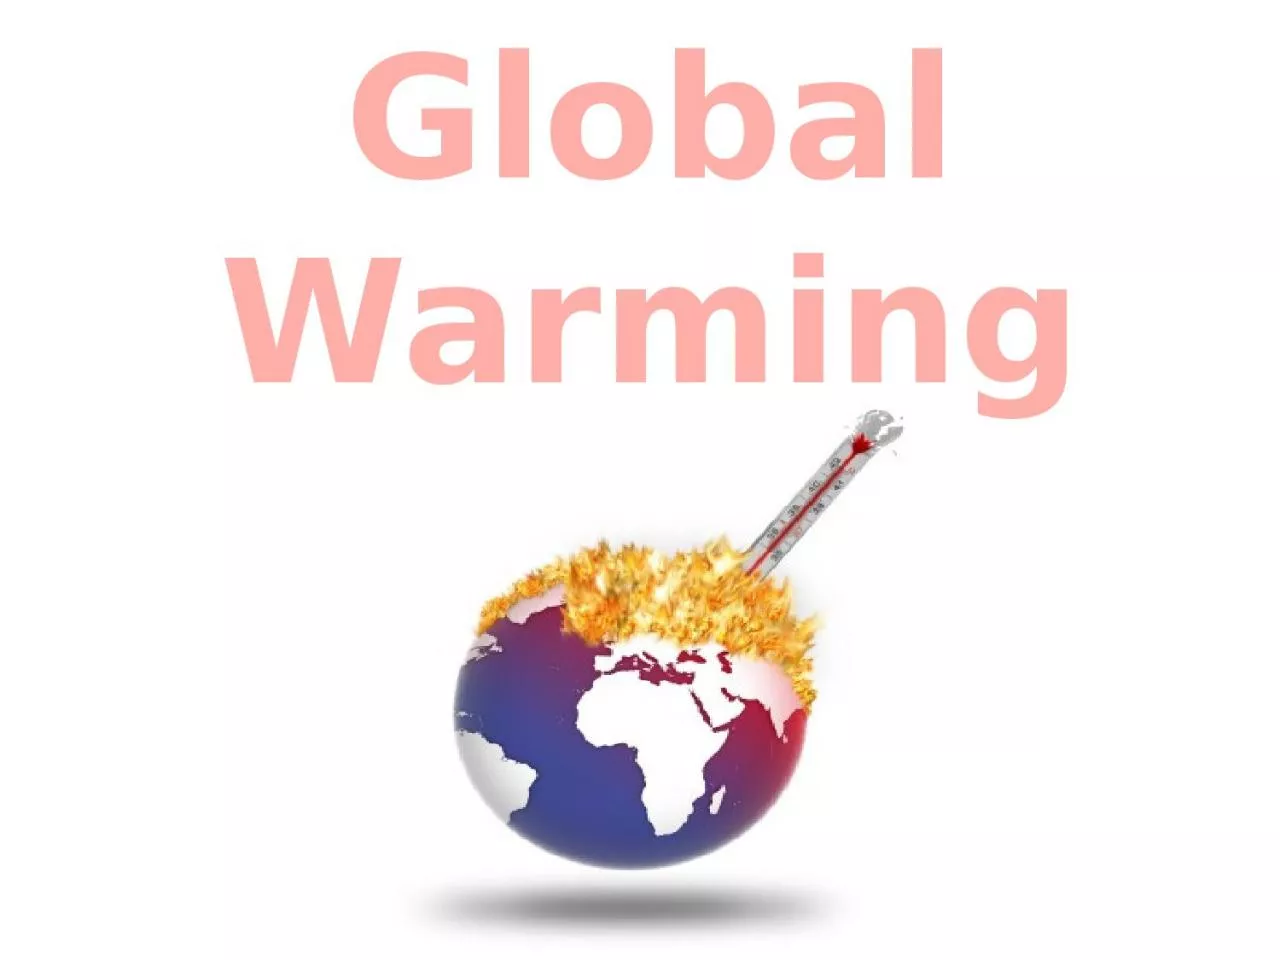 Global Warming What Is Global Warming?